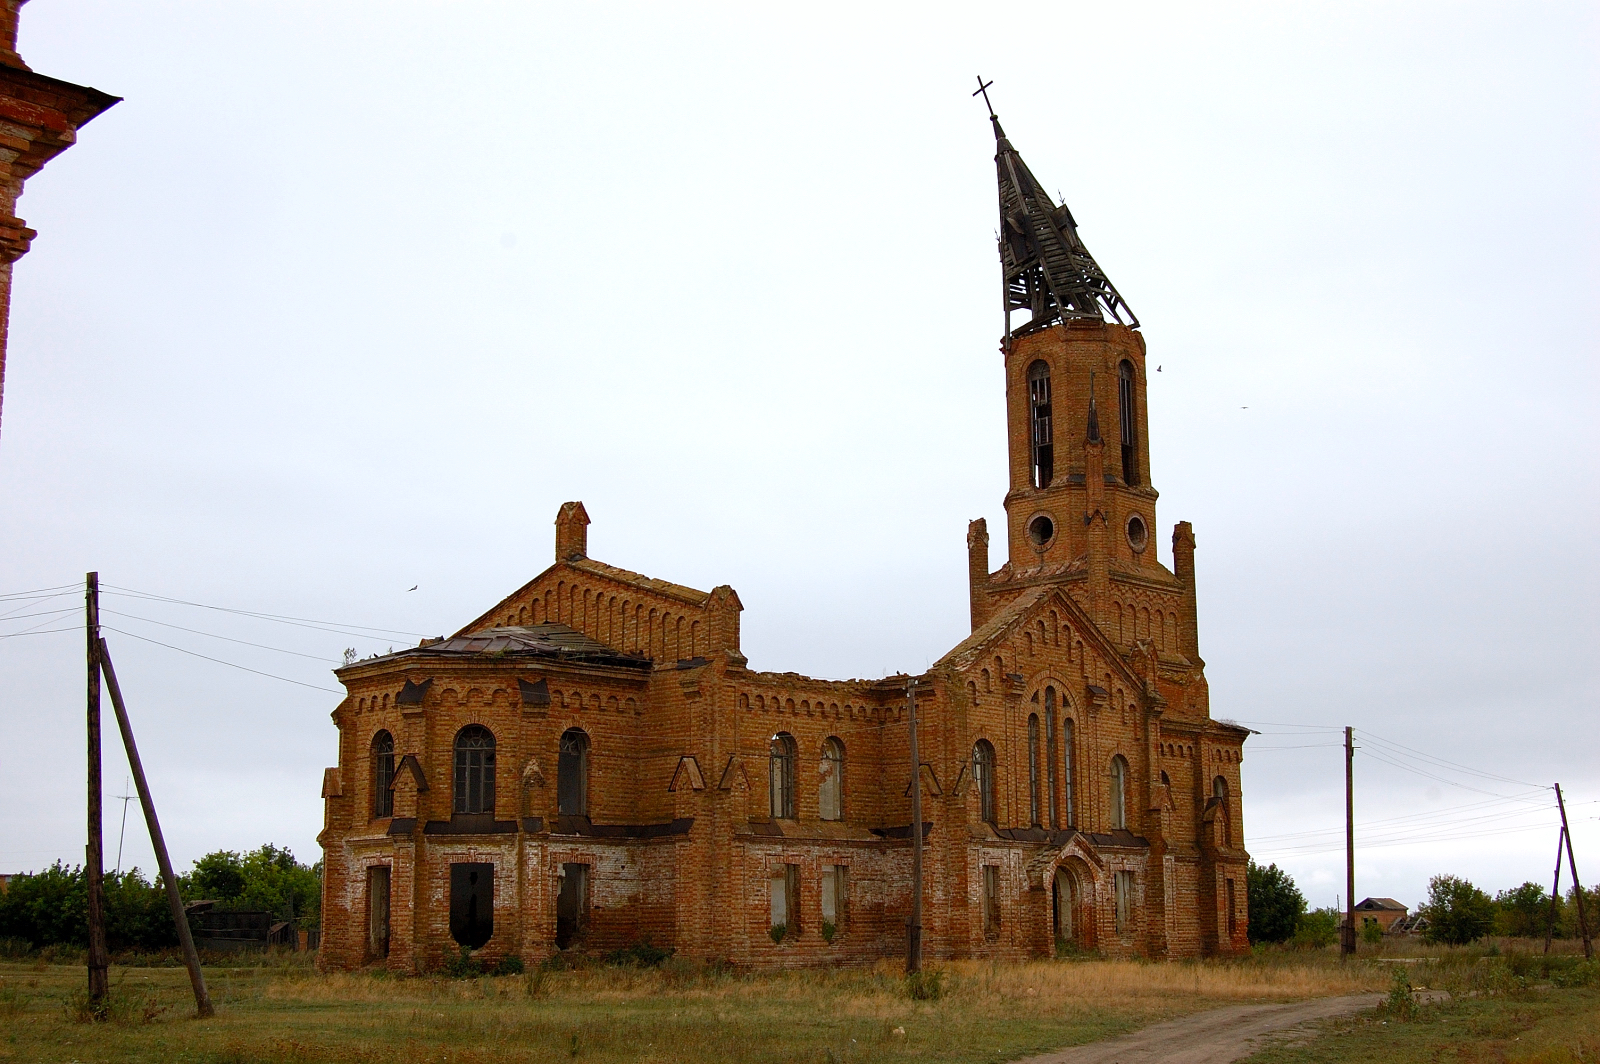 The ruins of the magnificent church in Messer. Source: Steve Schreiber (2006).